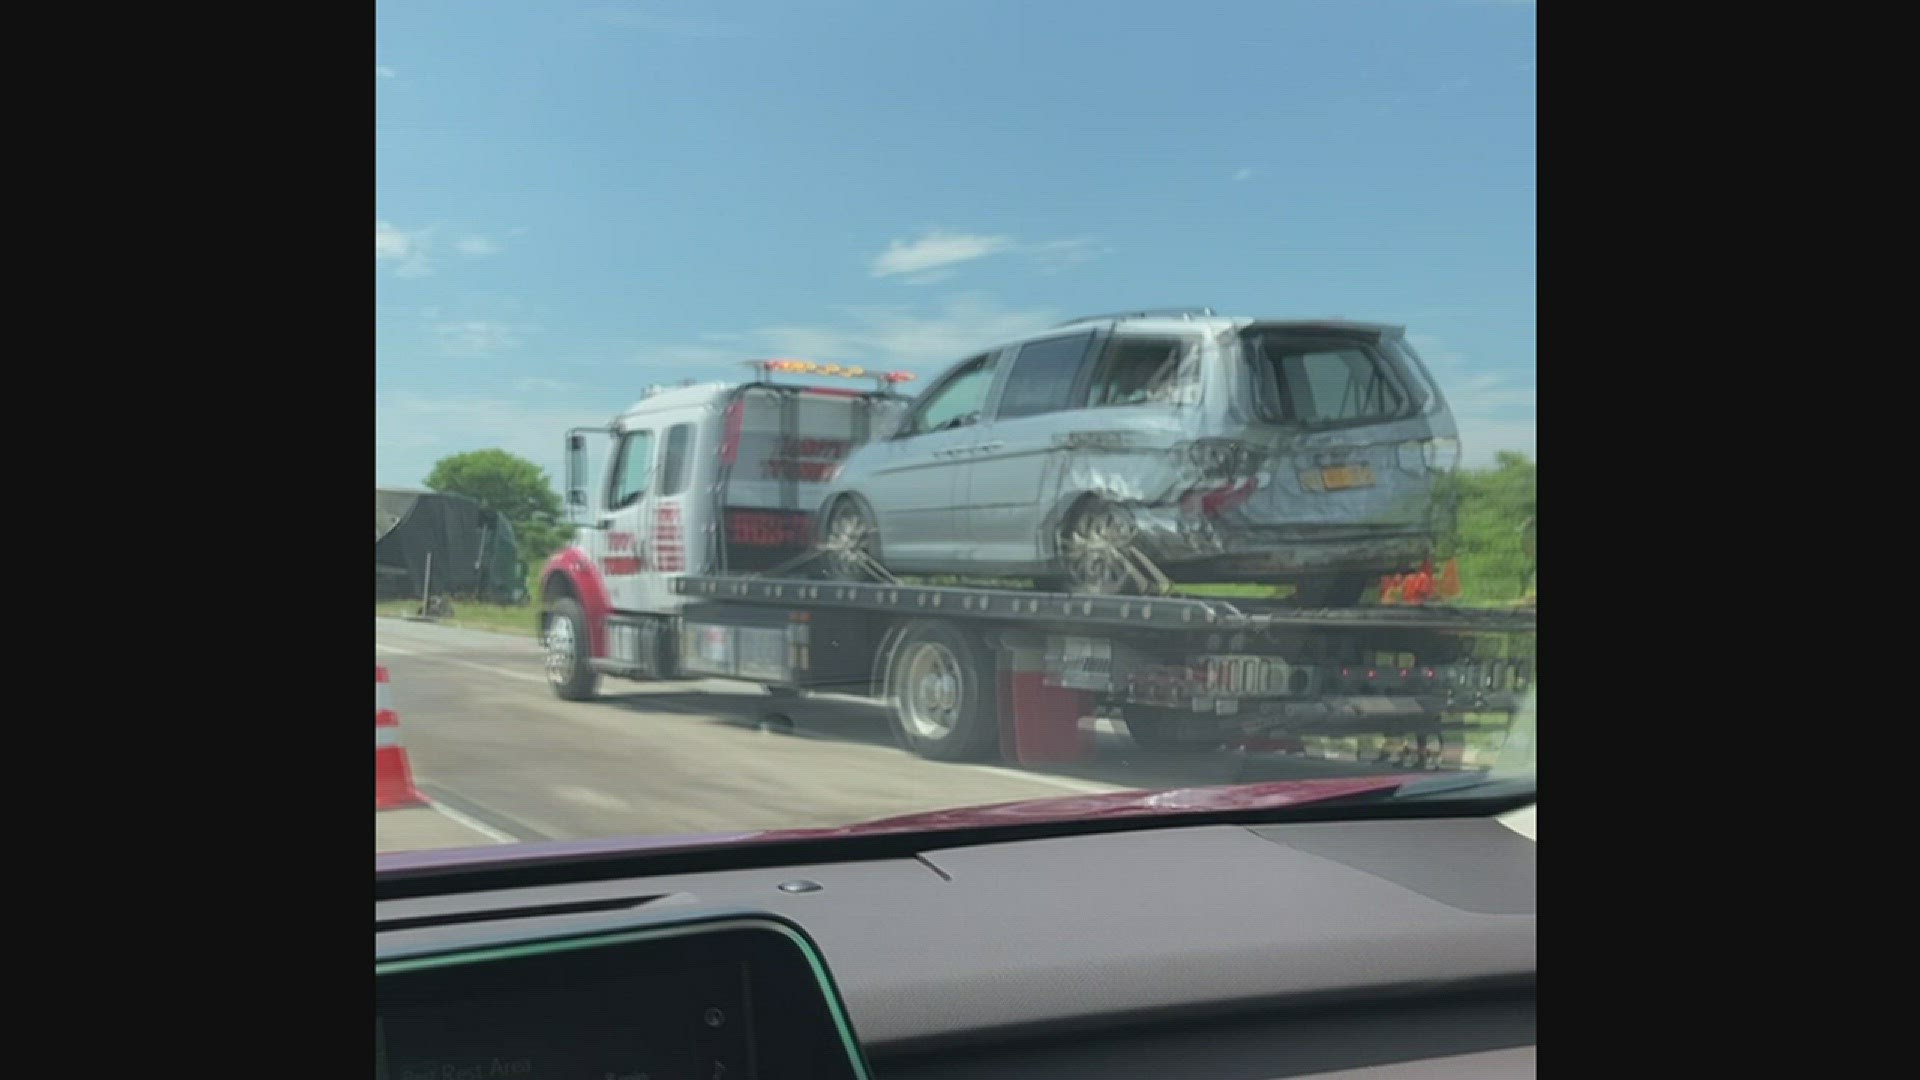 A multiple vehicle crash on I-80 westbound near Durant on June 30 forced a detour off the interstate for a couple hours Friday afternoon.